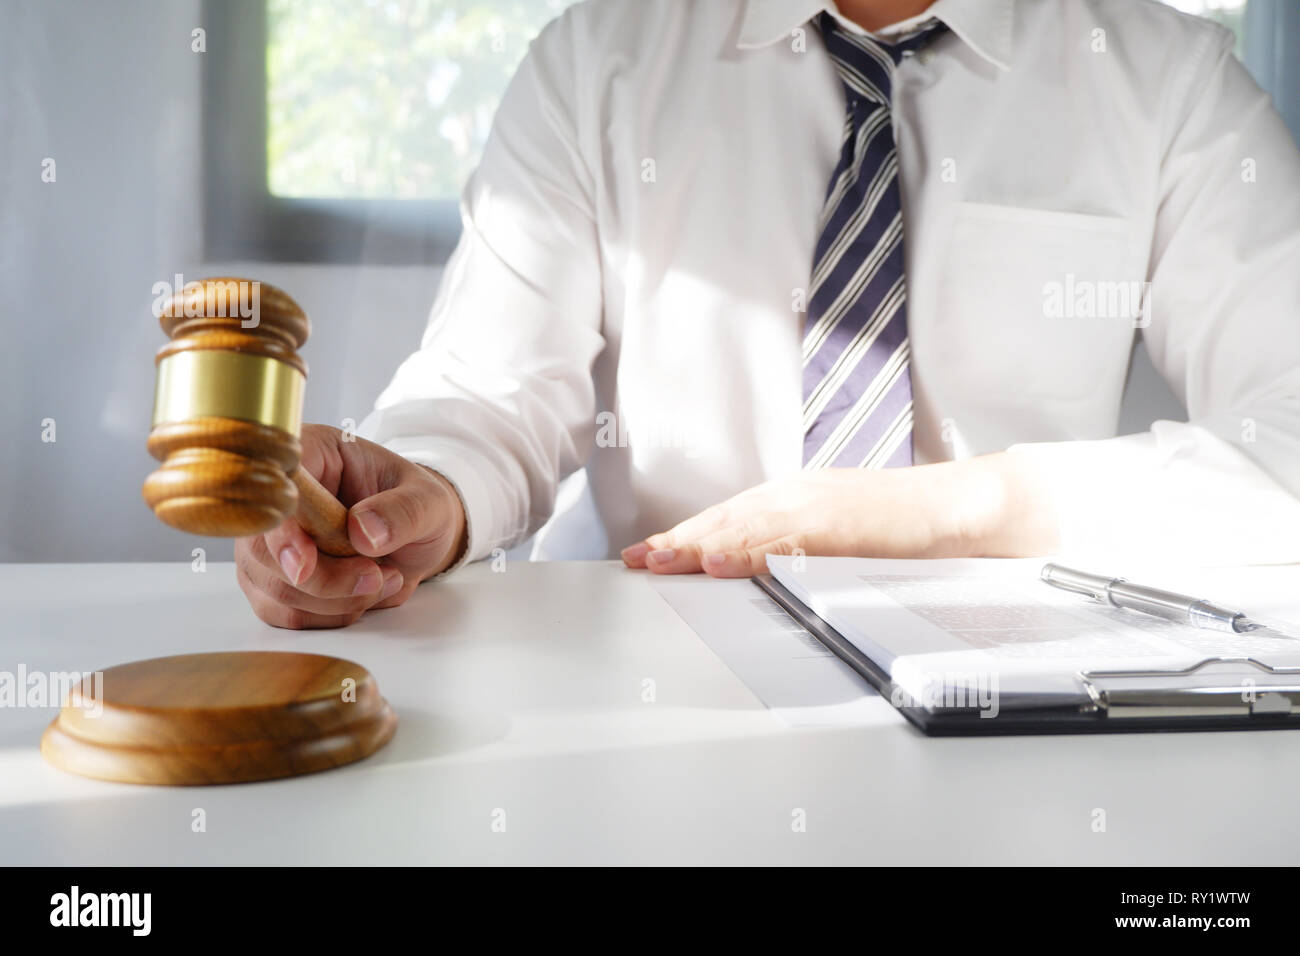 Judge hitting gavel and the report of the case with note paper on table, Law and justice concept. Stock Photo